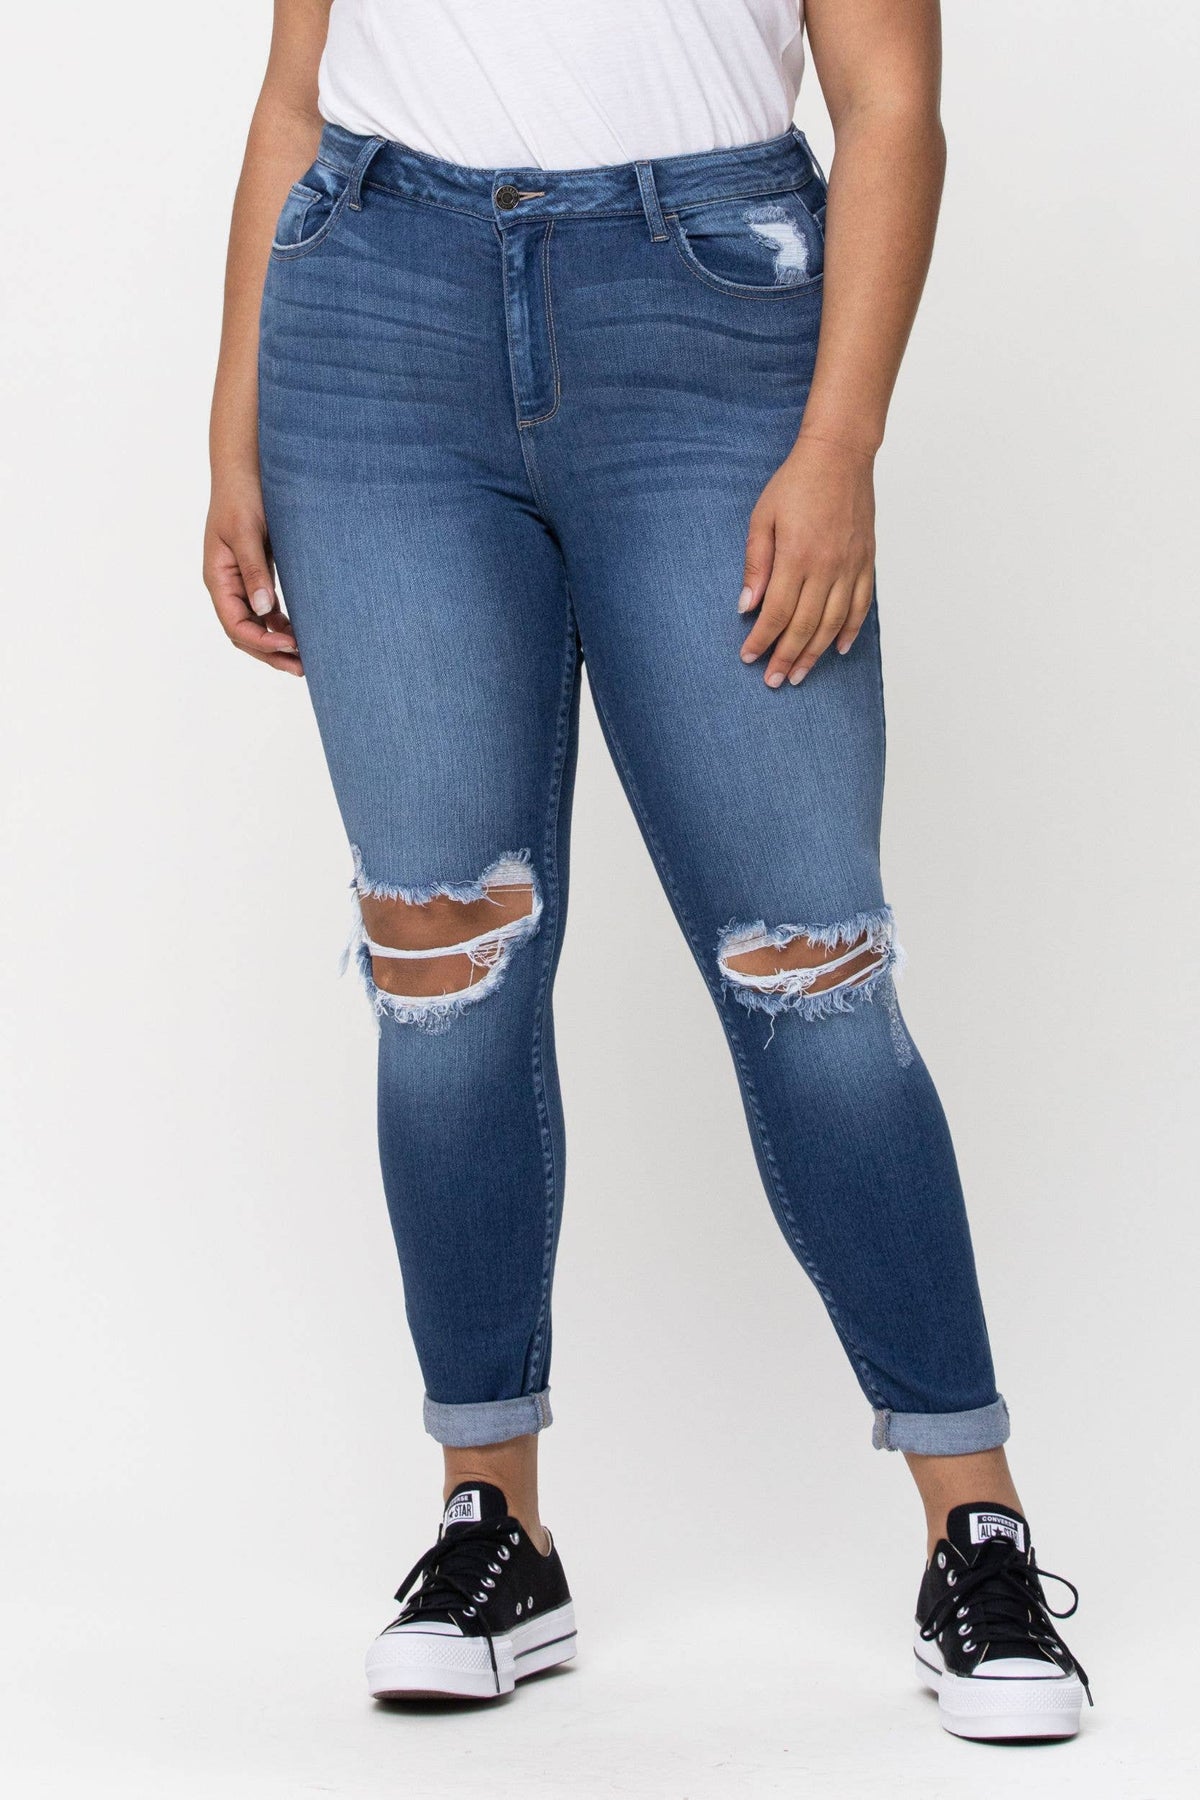 Harper Distressed Skinny Jean, Plus Sizes--Lemons and Limes Boutique